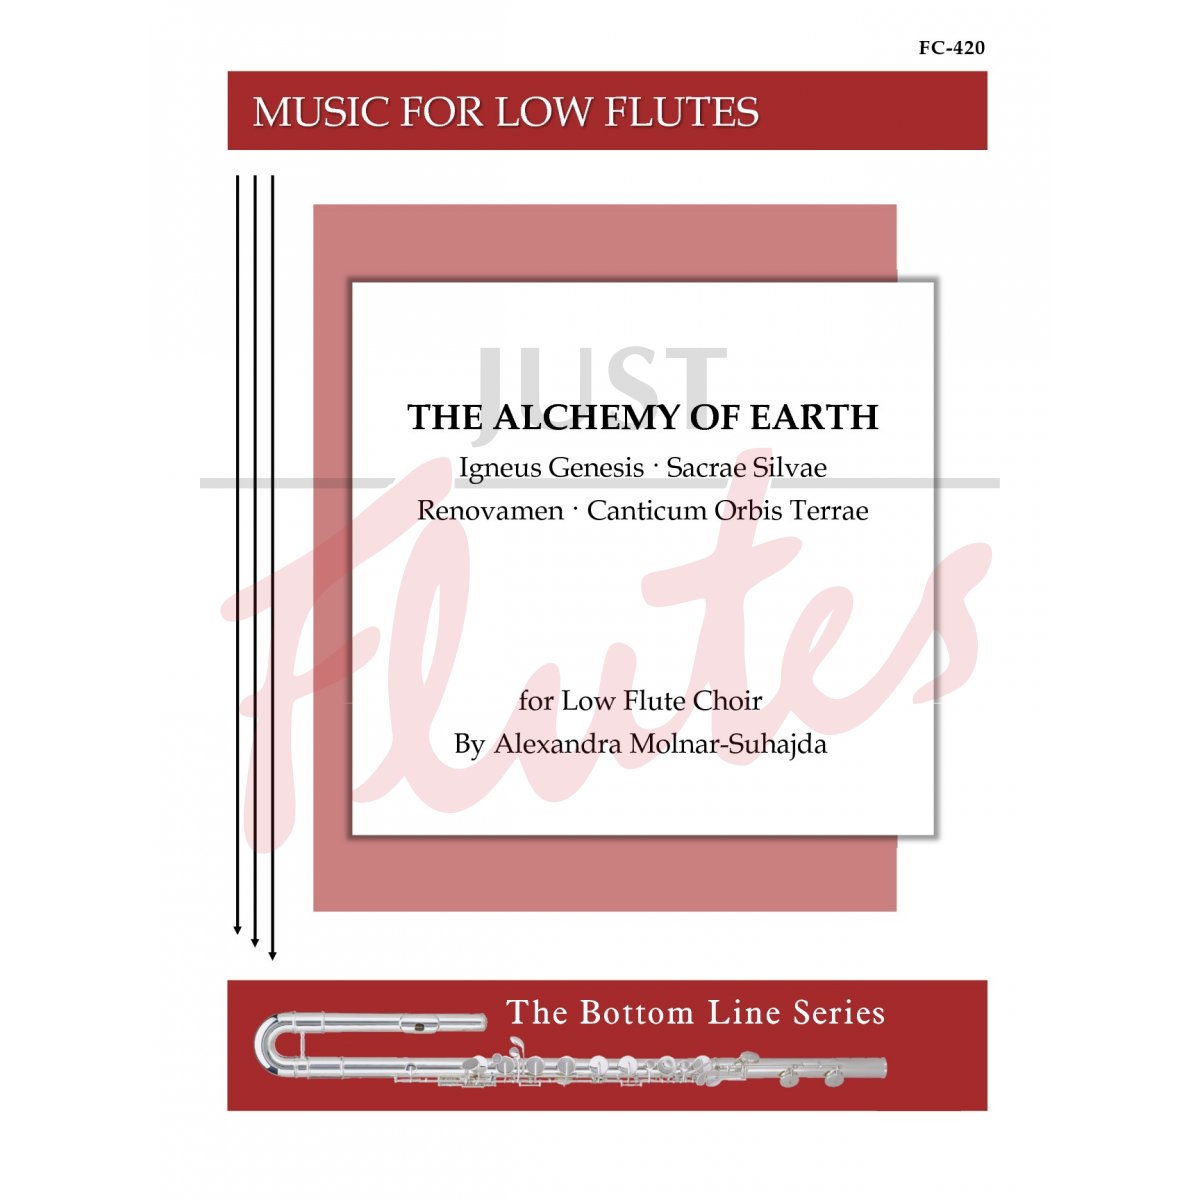 The Alchemy of Earth for Low Flute Choir